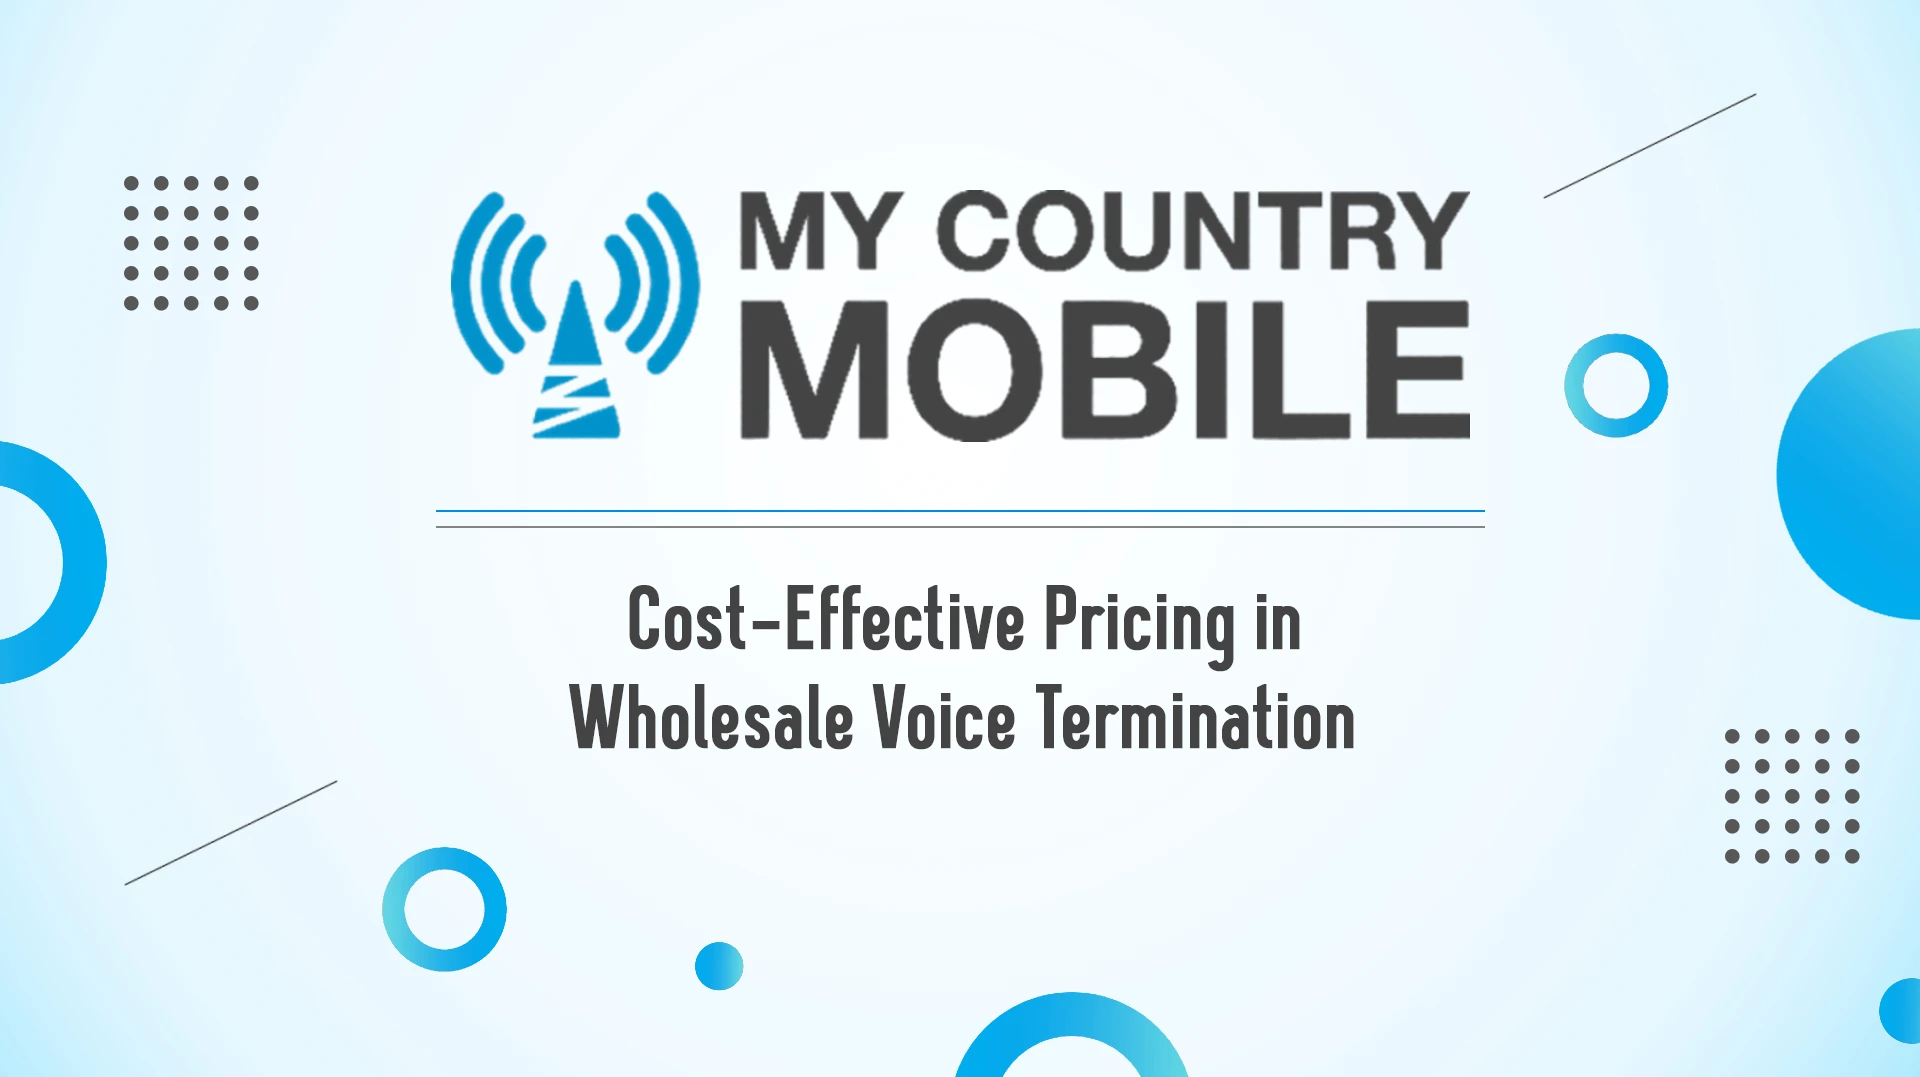 Cost-Effective Pricing in Wholesale Voice Termination